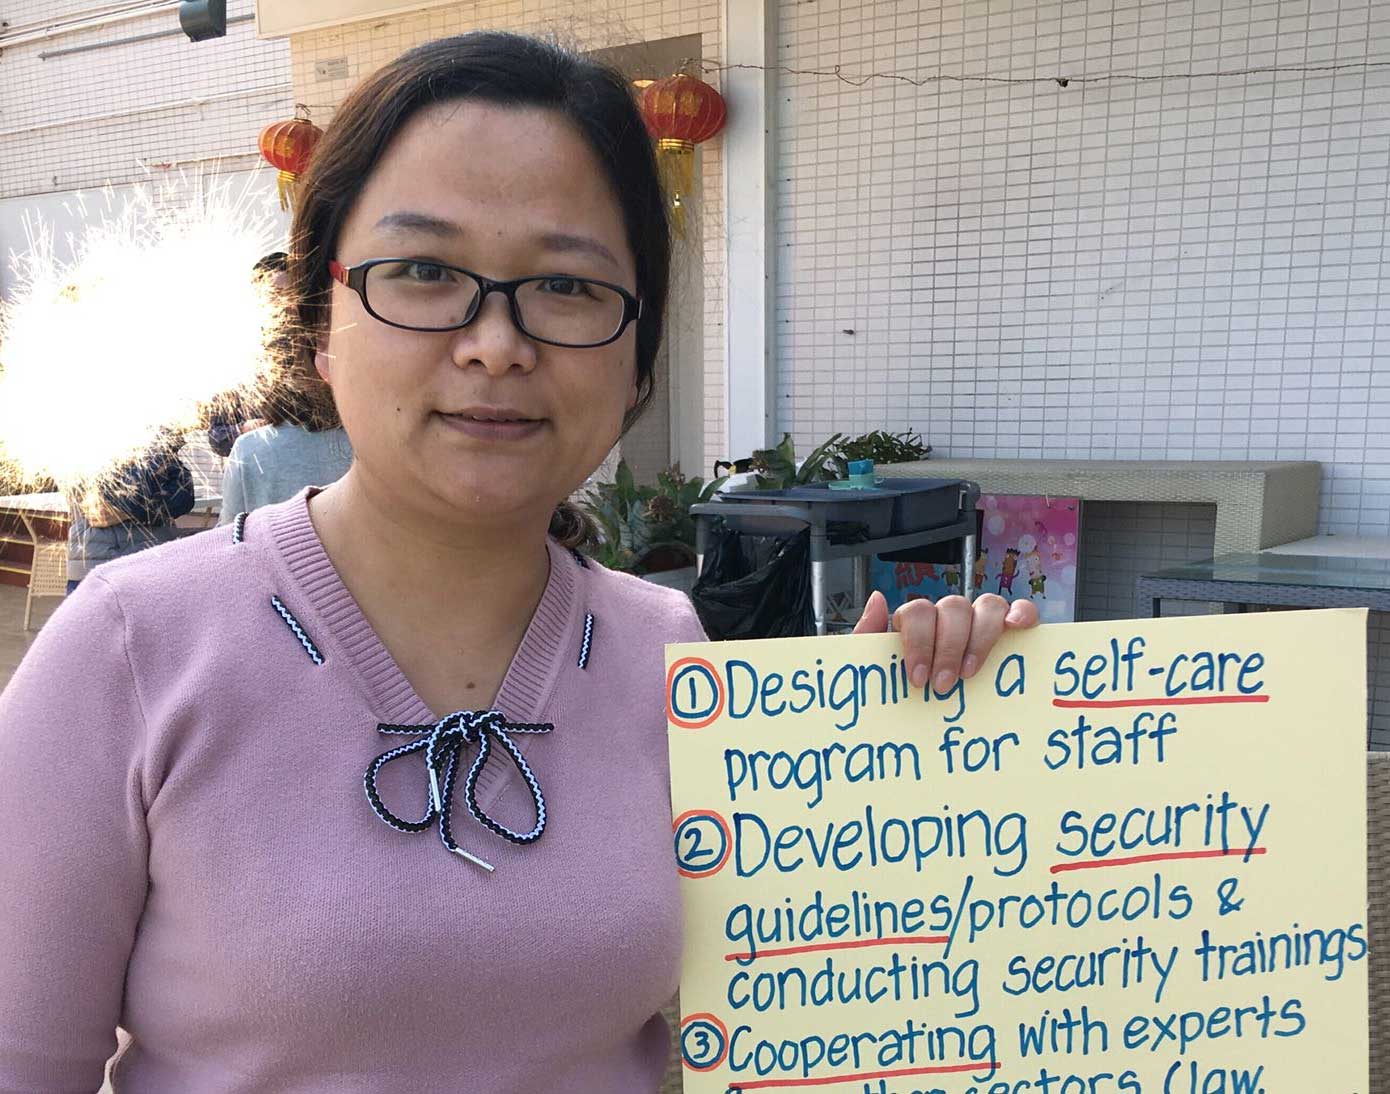 China Change » Wu Rongrong: How I Became a Women's Rights Advocate